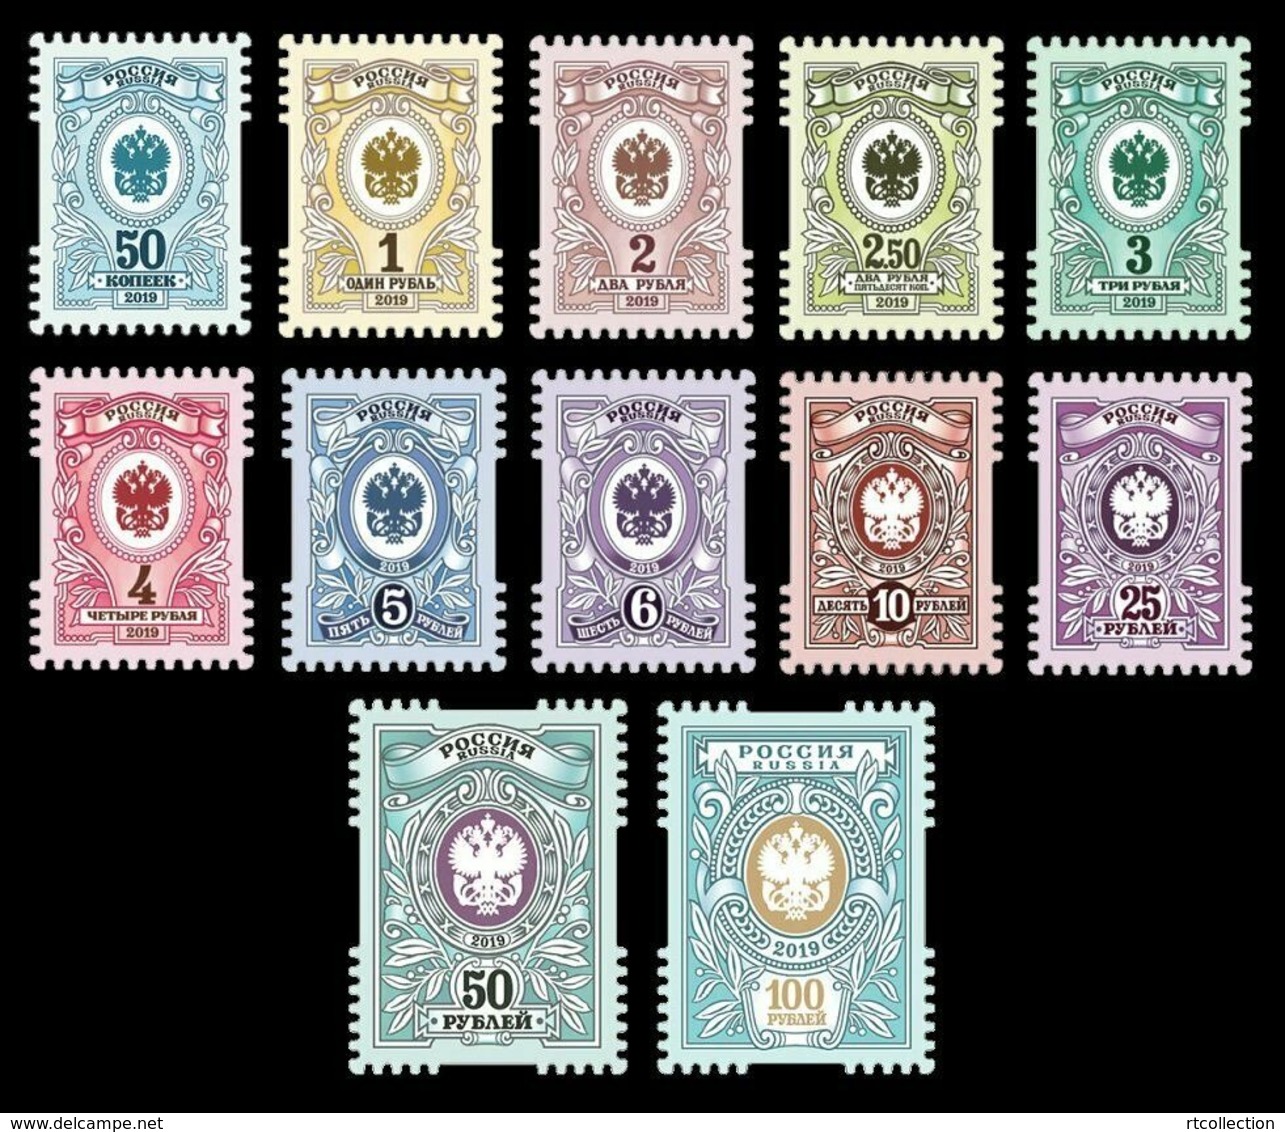 Russia 2019 One Set Of 12 Seventh Issue Of Definitive Definitives Eagle Eagles Bird Birds Service Post Stamps MNH - Post